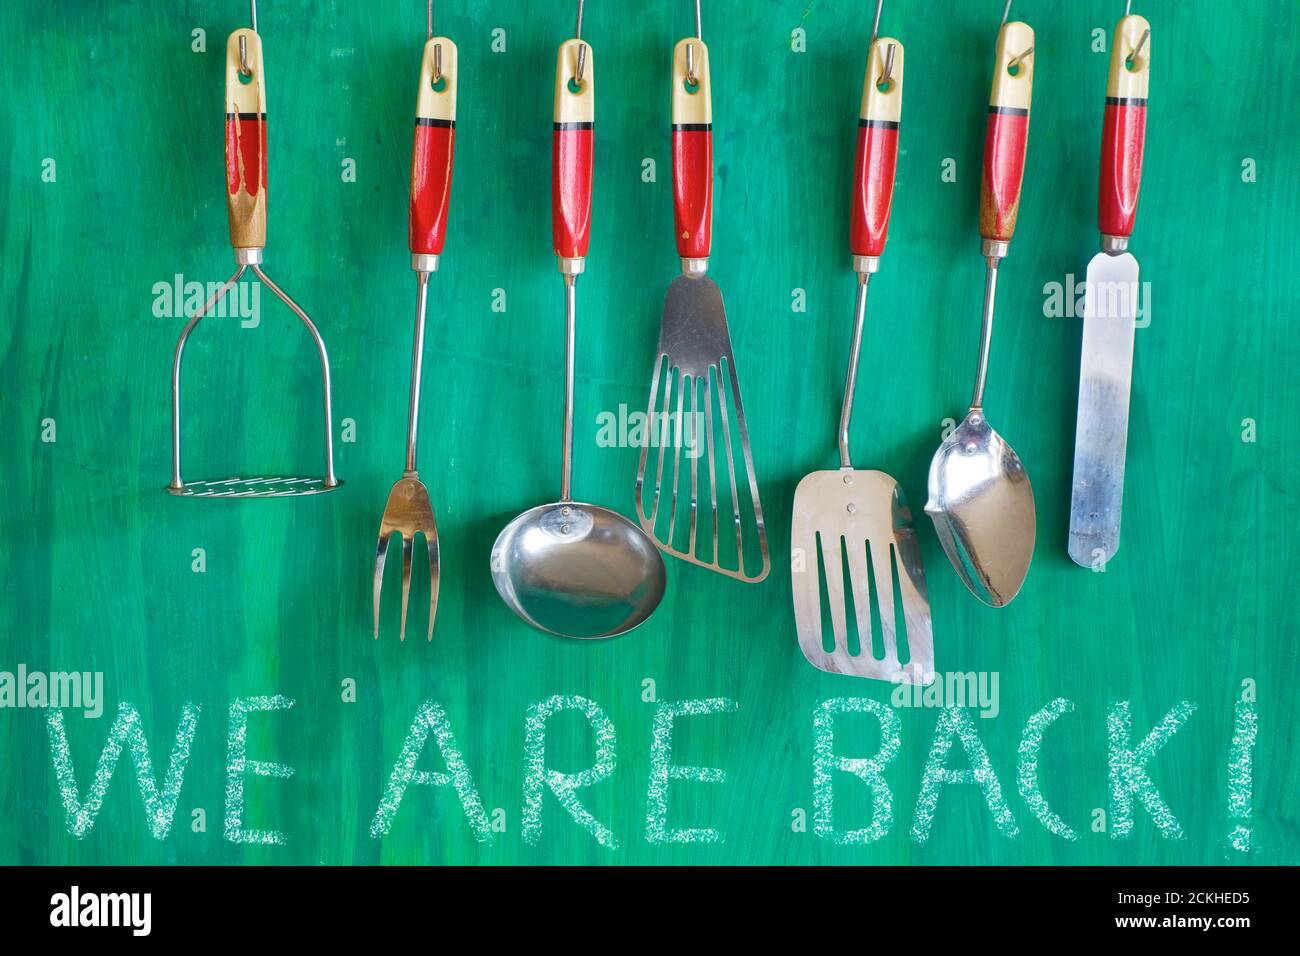 restaurant kitchen utensils on green painted wall, with message we are back. Restart gastronomy business after covid-19 lockdown Stock Photo